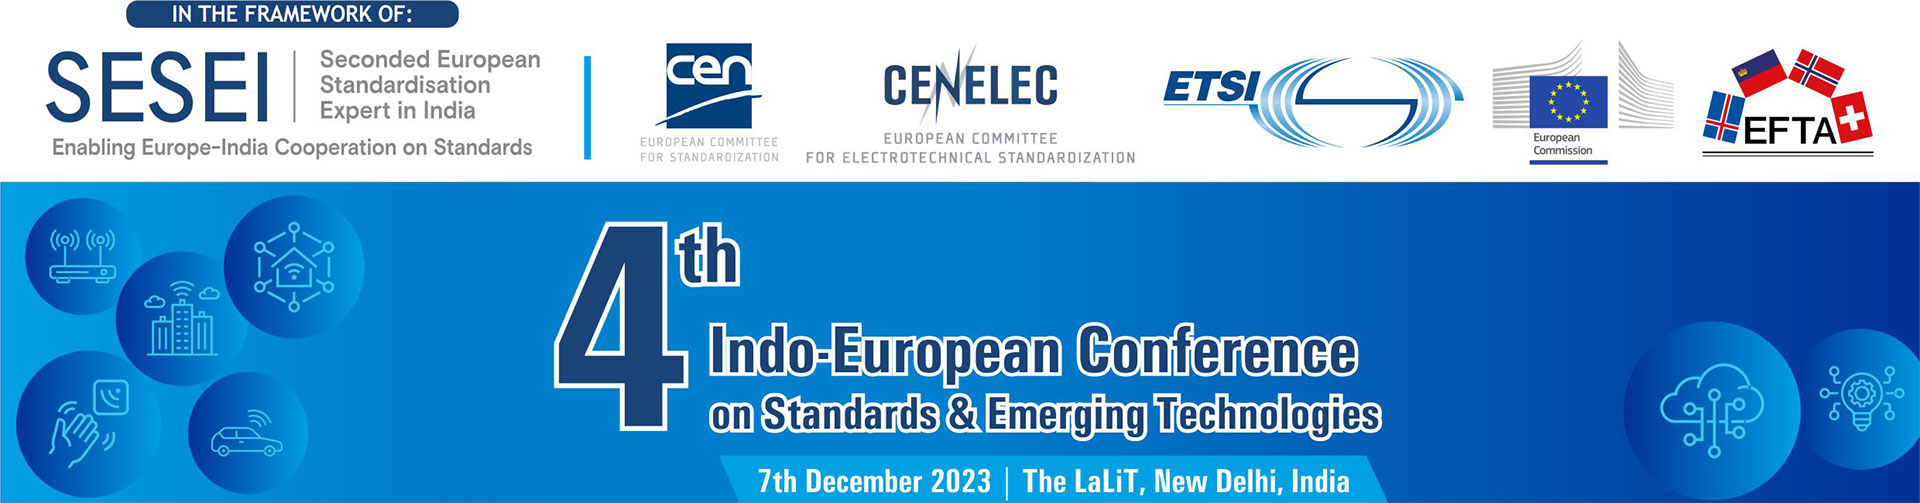 4th Indo-European Conference on Standards & Emerging Technologies